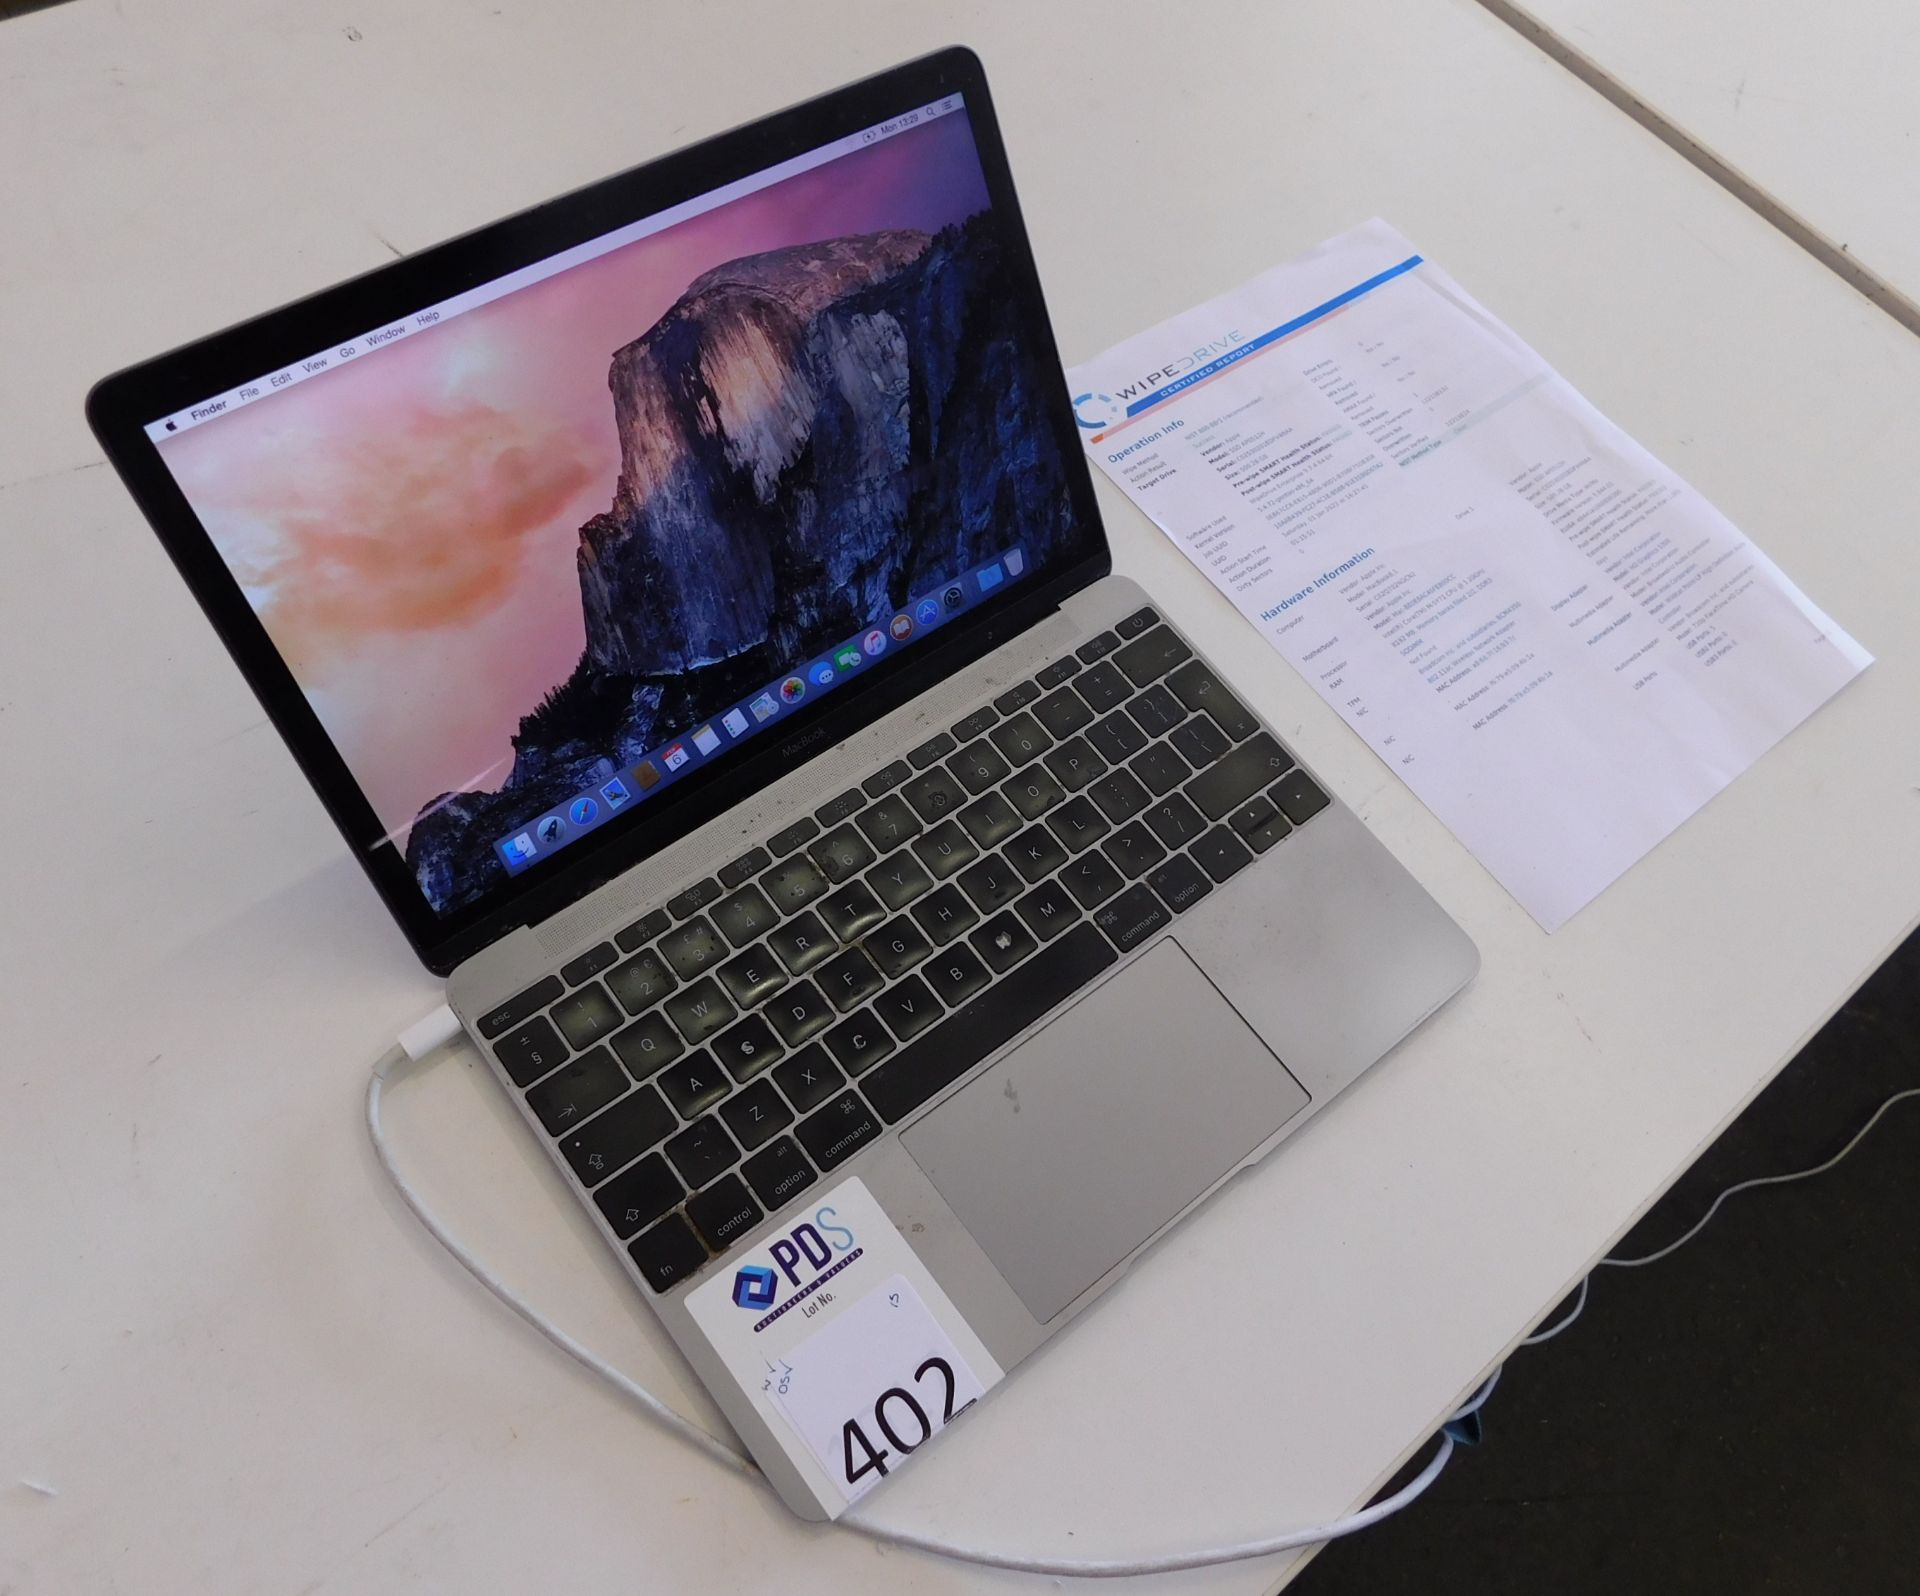 Apple MacBook, A1534, Serial Number C02Q702NGCN2, Core M @ 1.2GHz, 8GB RAM, 500GB HDD, OS Installed,